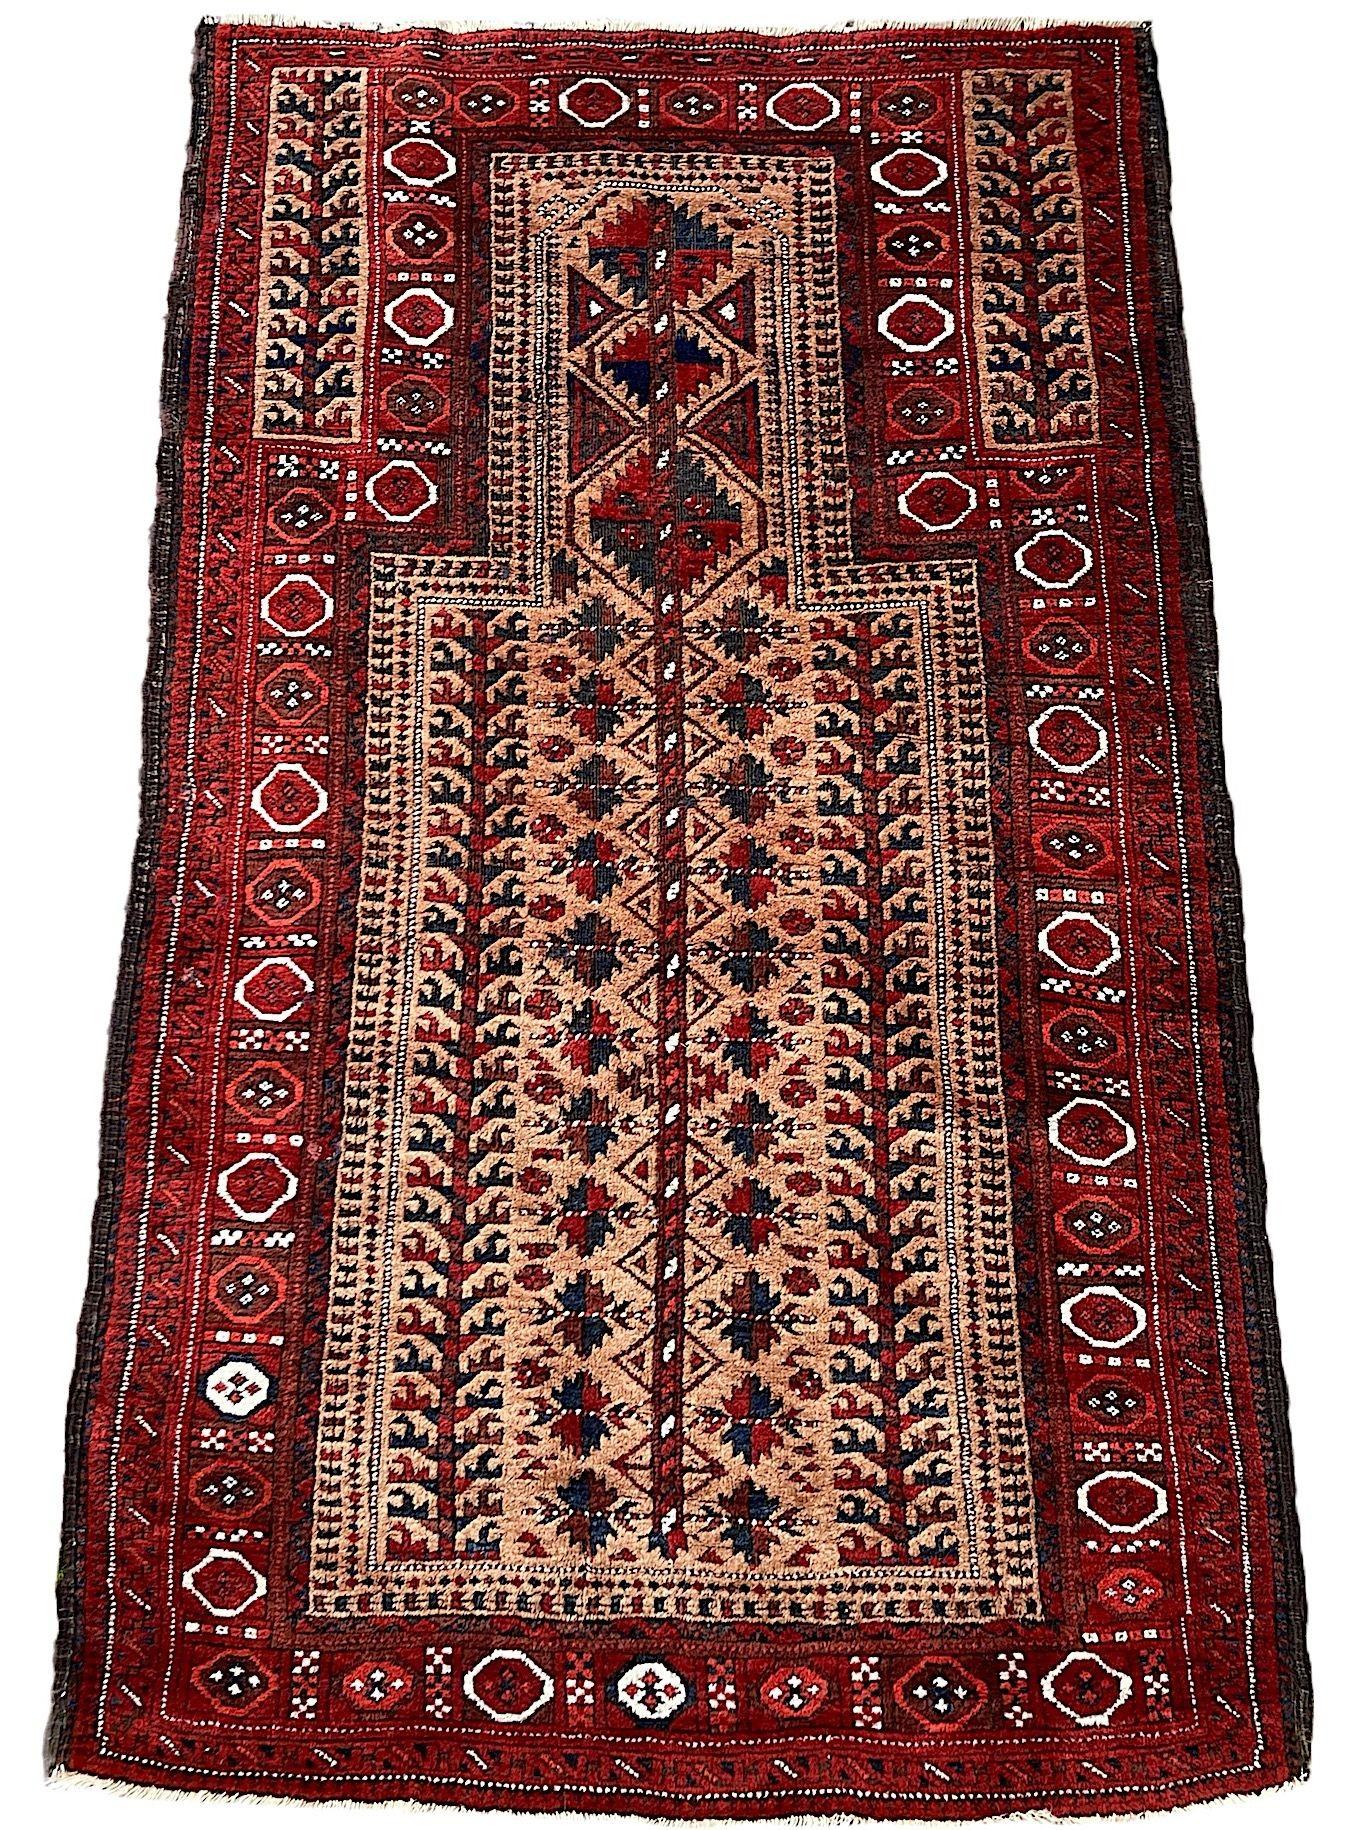 A wonderful antique tribal rug, hand woven by the nomadic Belouch tribe circa 1900. The rug features a classic prayer rug design with stylised trees and flowers on a camel coloured field. Finely woven with soft, lustrous wool and great secondary